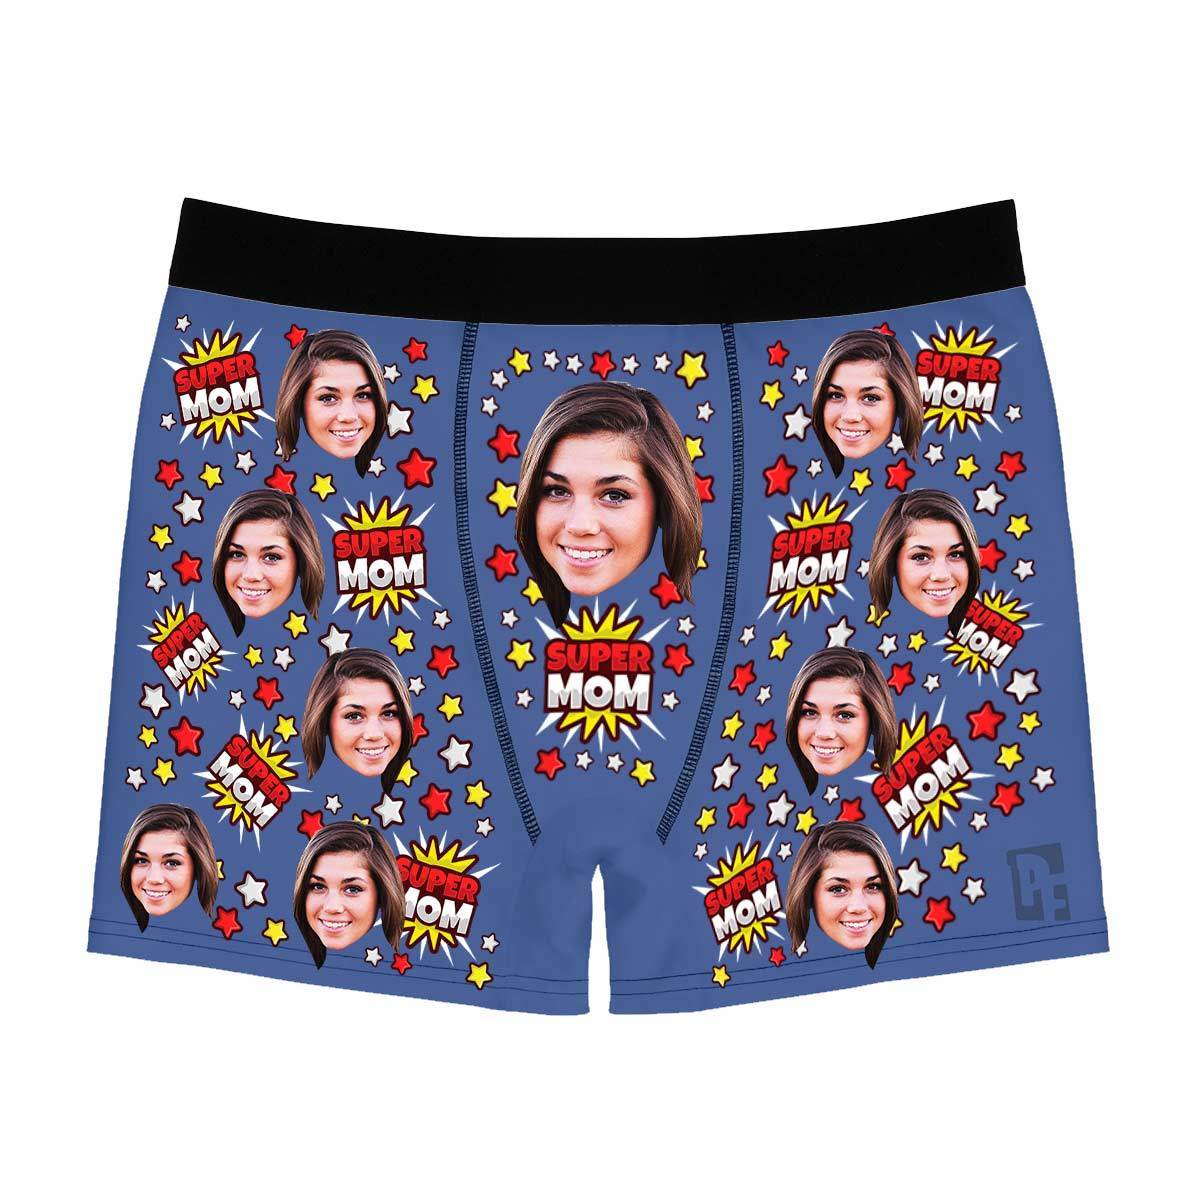 Darkblue Super mom men's boxer briefs personalized with photo printed on them